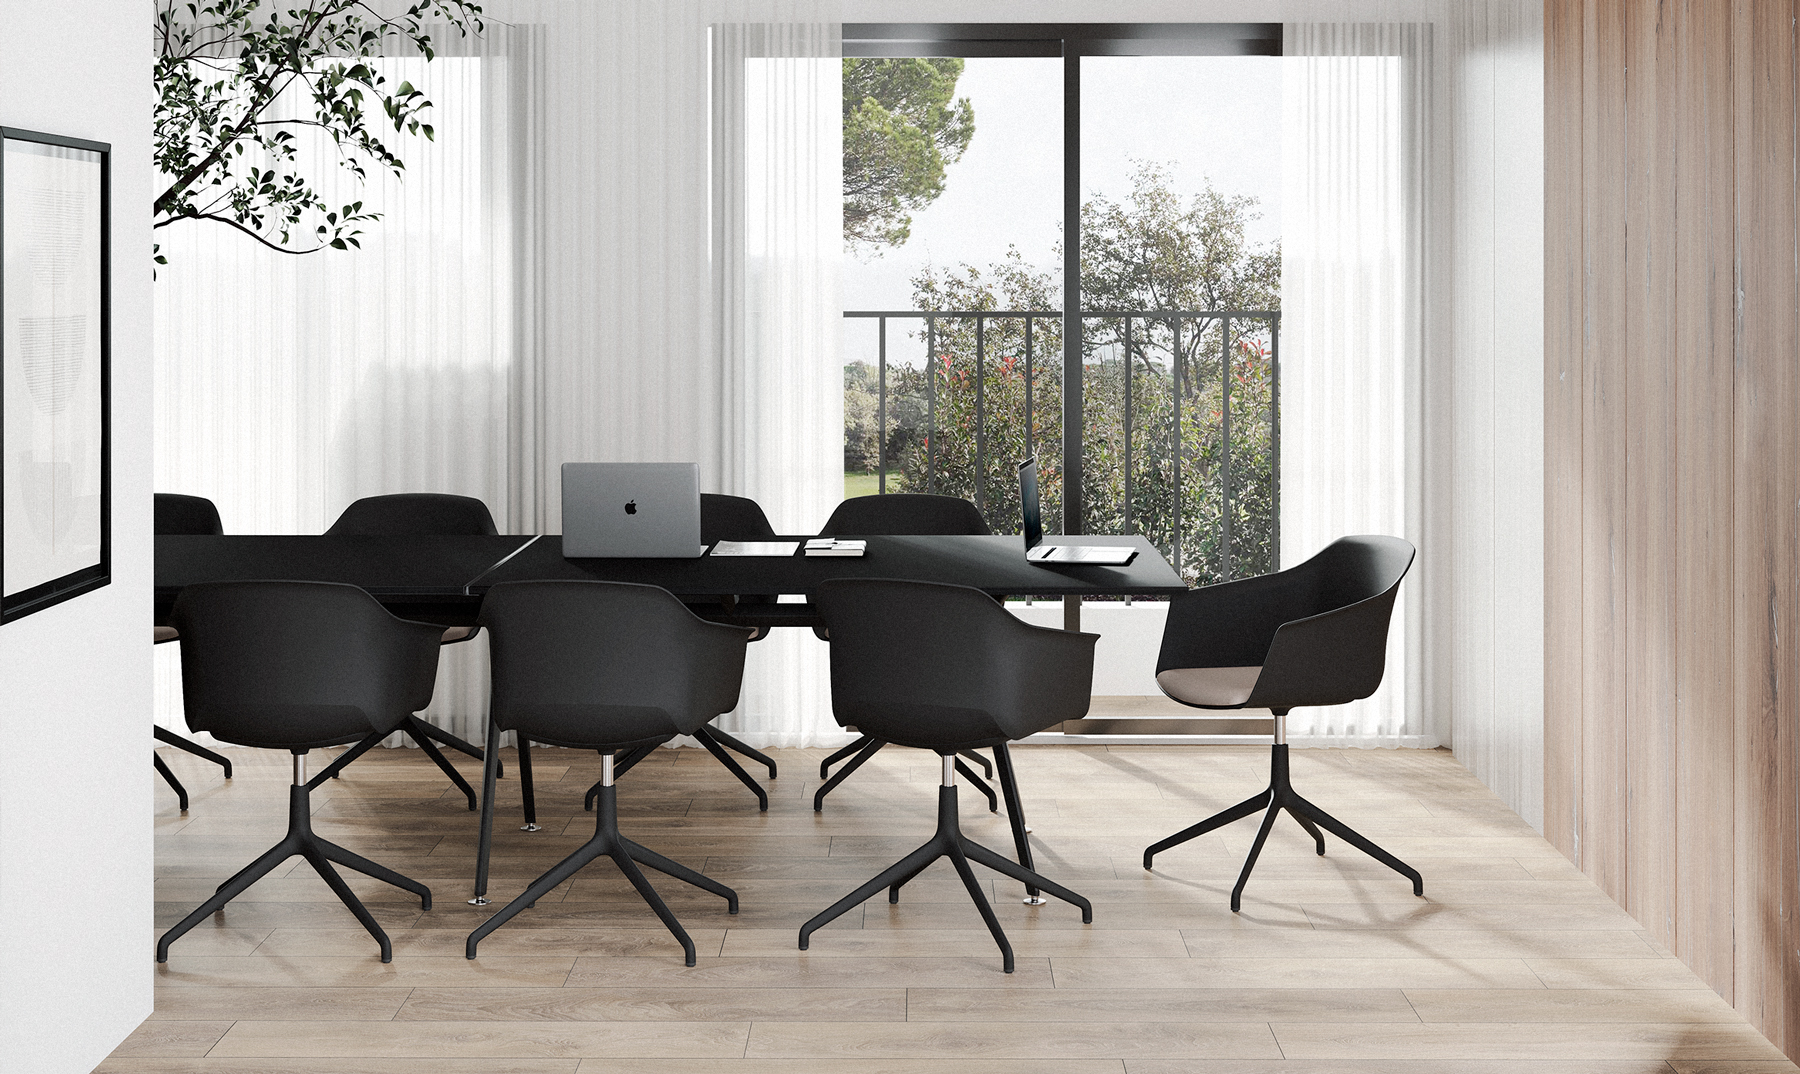 Modern conference room featuring Noom 60 chairs designed by Alegre Design for Actiu. The room includes a large, dark conference table with a black base and is surrounded by Noom 60 chairs with a black finish and white cushions, mounted on wheeled bases for mobility. The setting is sleek and contemporary, with a minimalist light fixture above the table and large windows providing natural light.